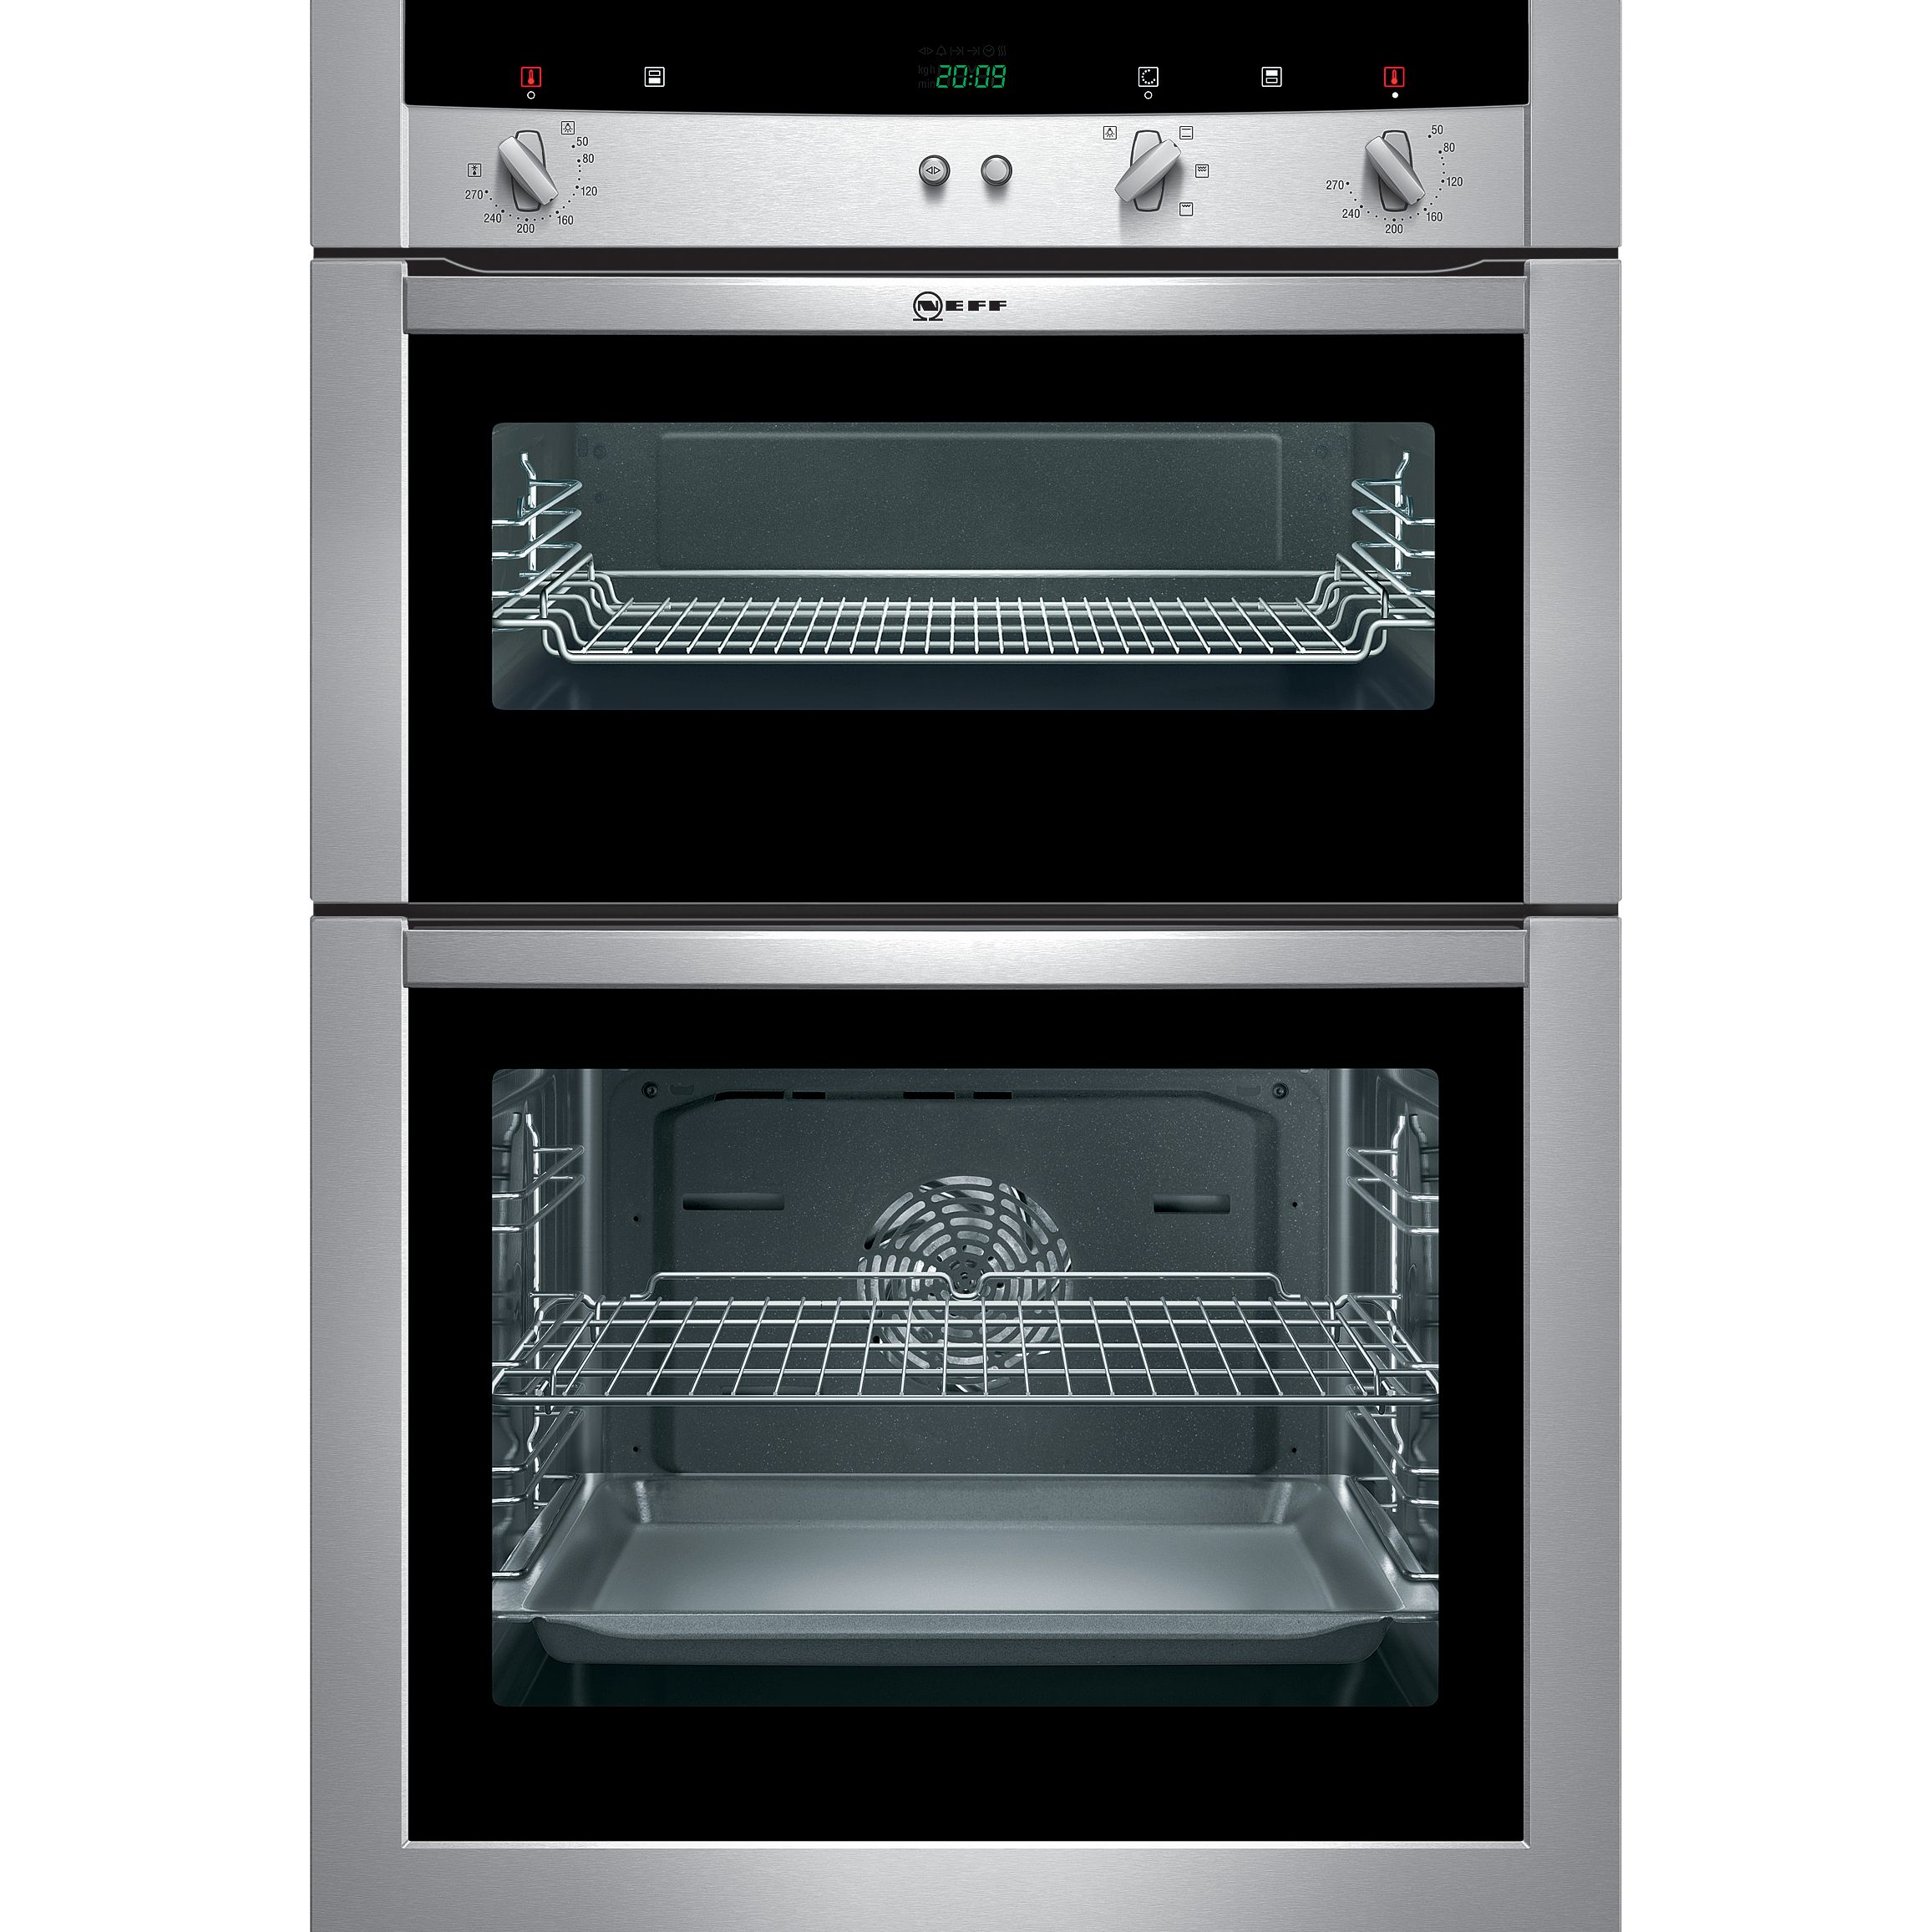 Neff U15M42N0GB Double Electric Oven, Stainless Steel at John Lewis